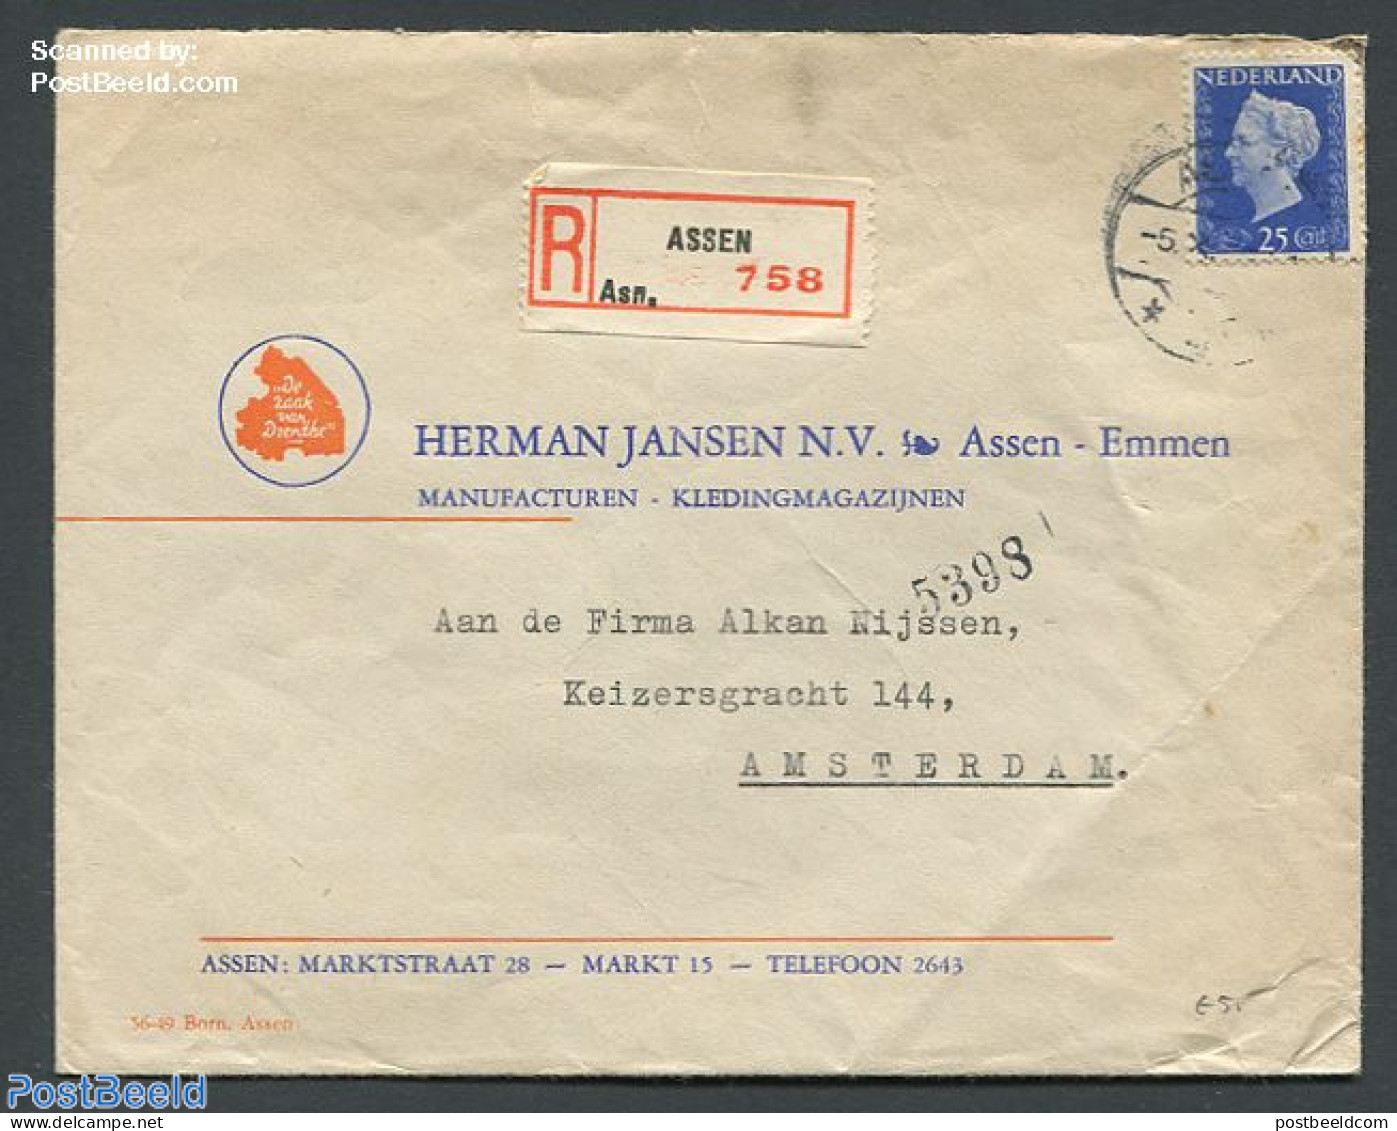 Netherlands 1947 Registered Cover Assen To Amsterdam With Nvhp 483, Postal History, History - Kings & Queens (Royalty) - Cartas & Documentos